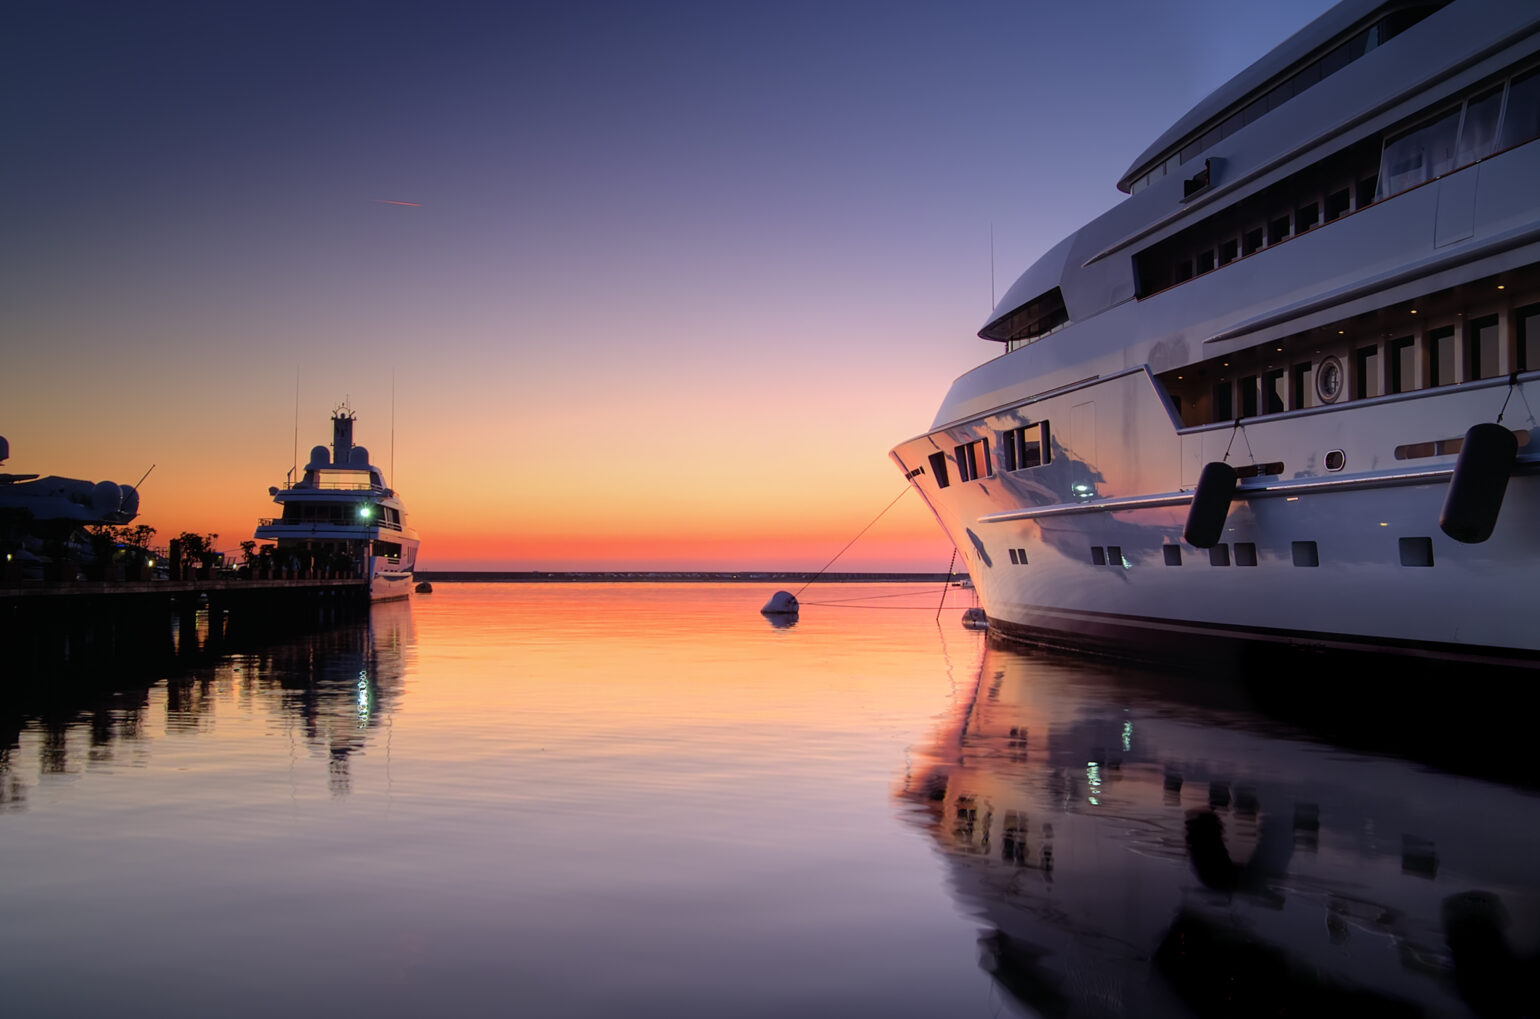 Ocean sunset with two superyachts